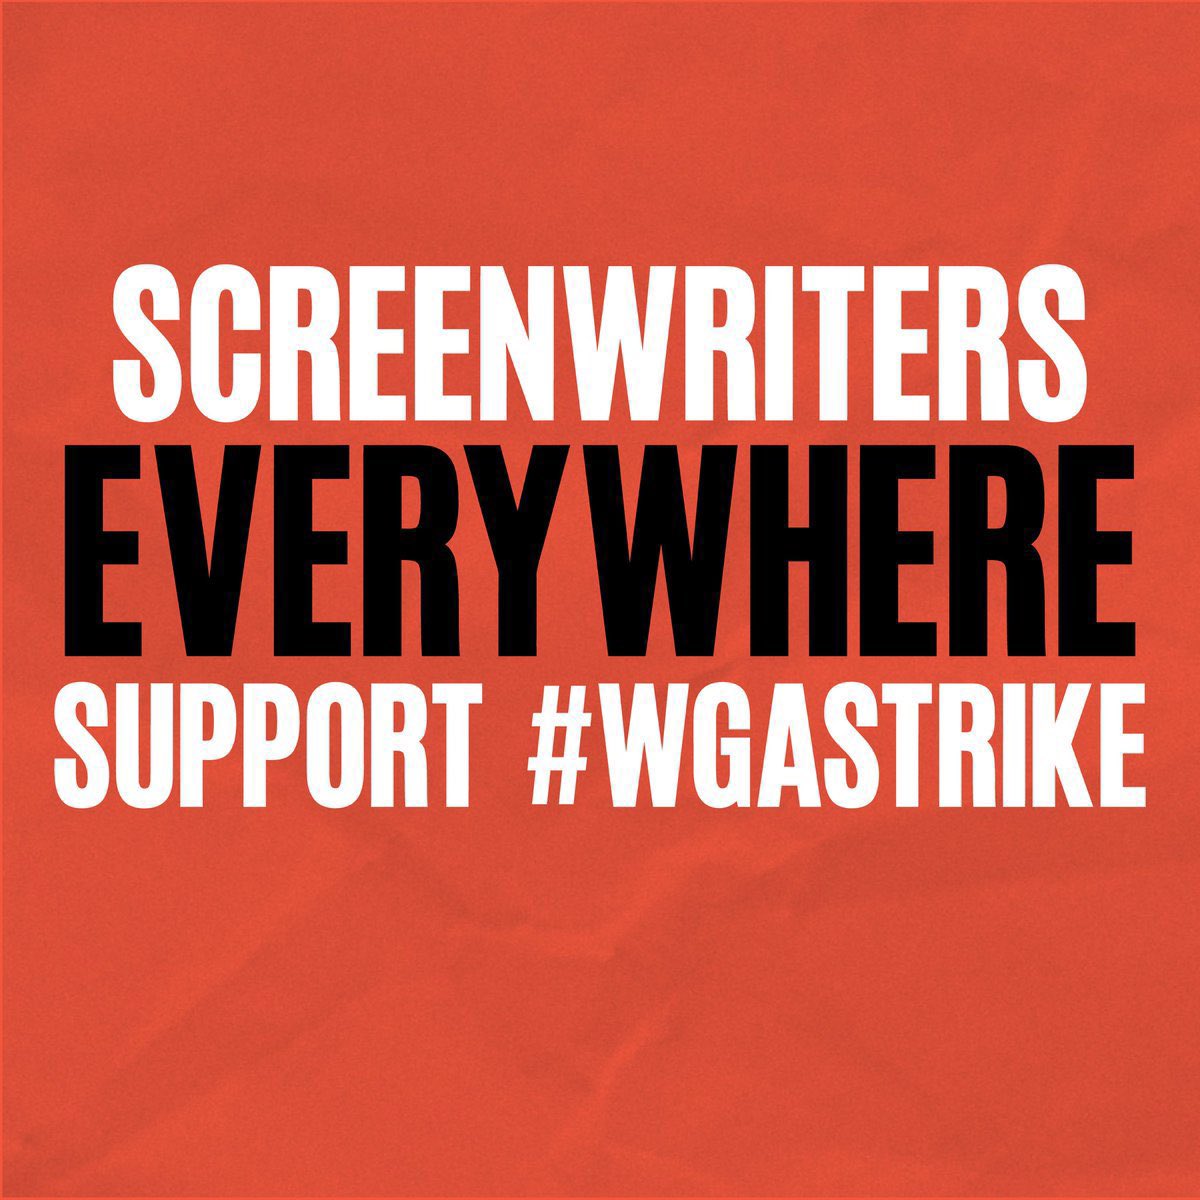 While I can’t join the picket lines I still stand in solidarity with the WGA today and everyday! #ScreenwritersEverywhere #WGAStrong #WGAStrike #preWGA